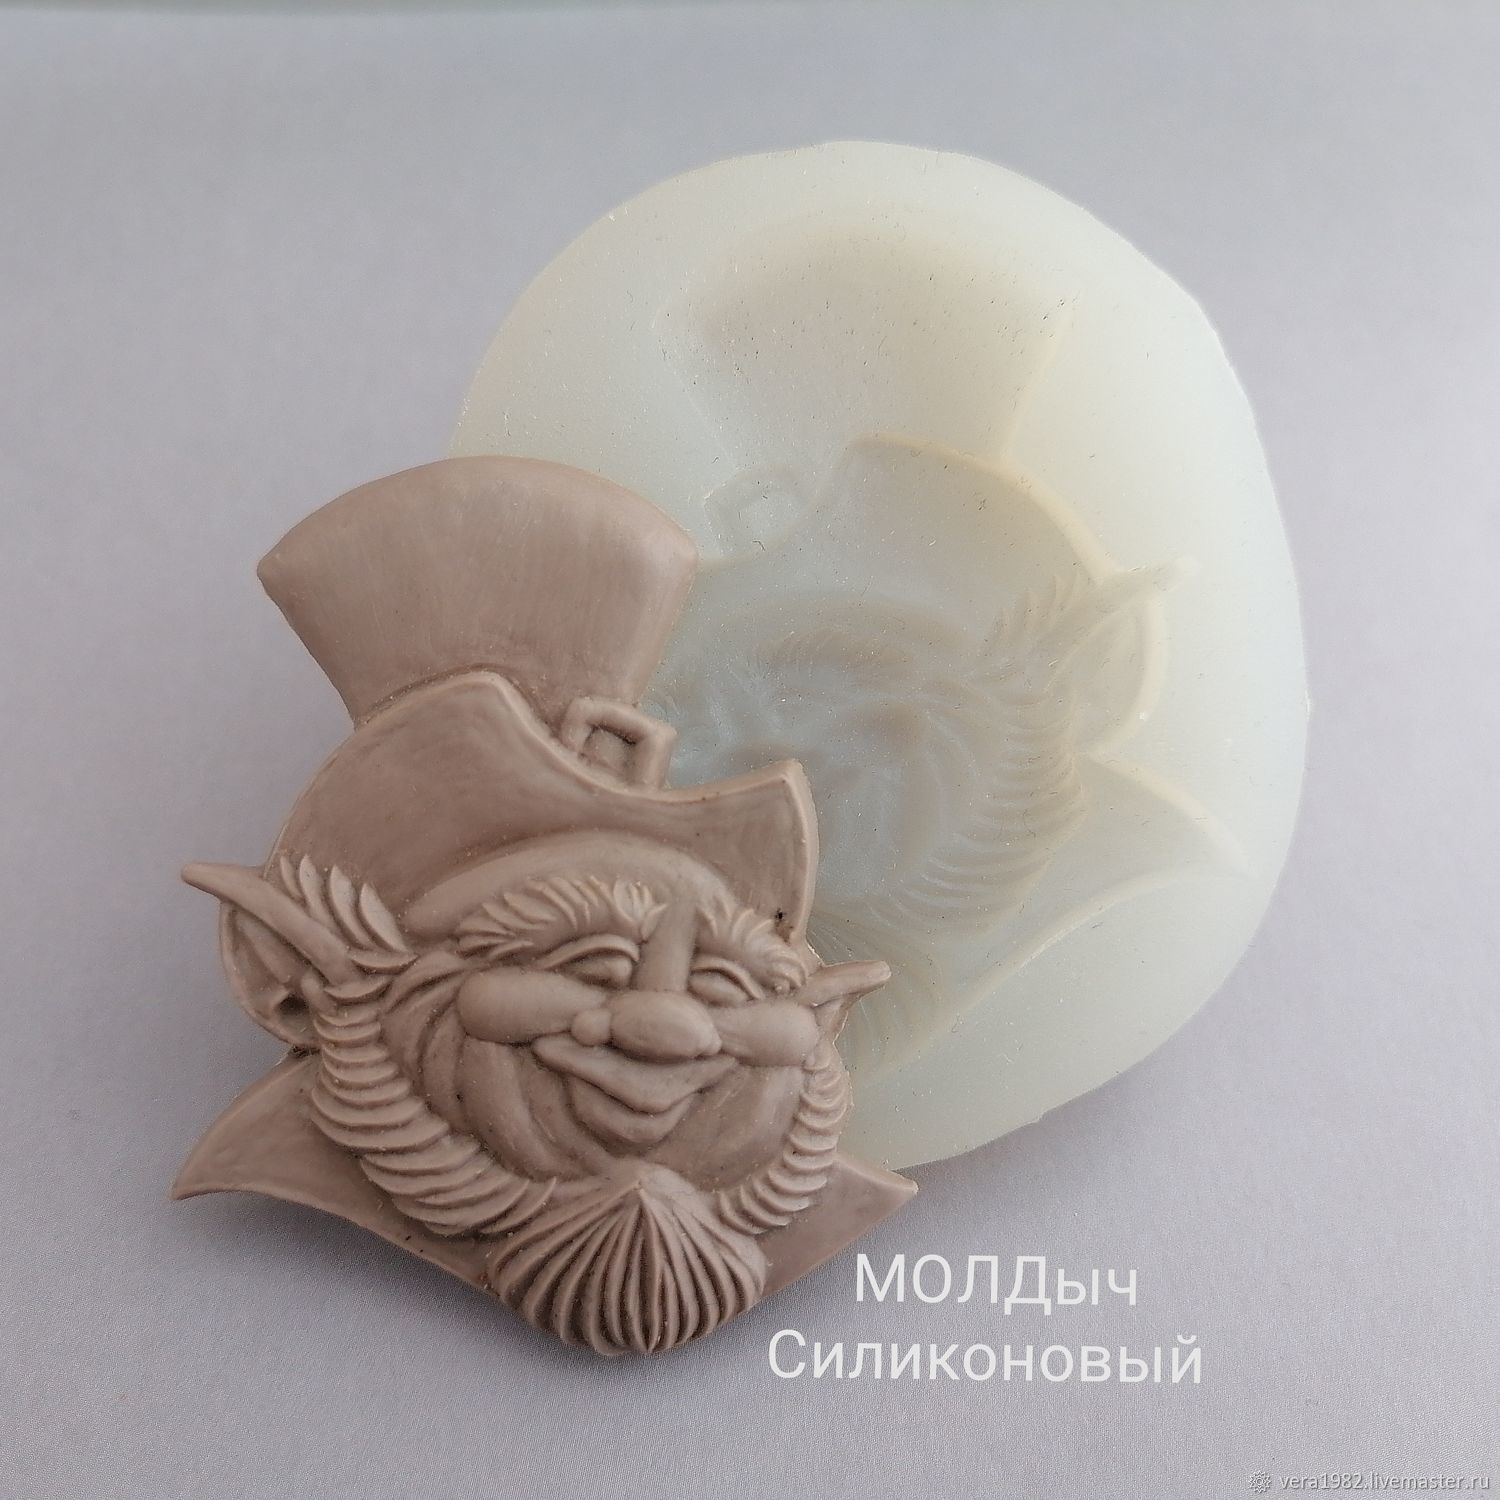 Silicone mold 5,5 x 5 cm Gnome, Decoupage and painting tools, Odintsovo,  Фото №1